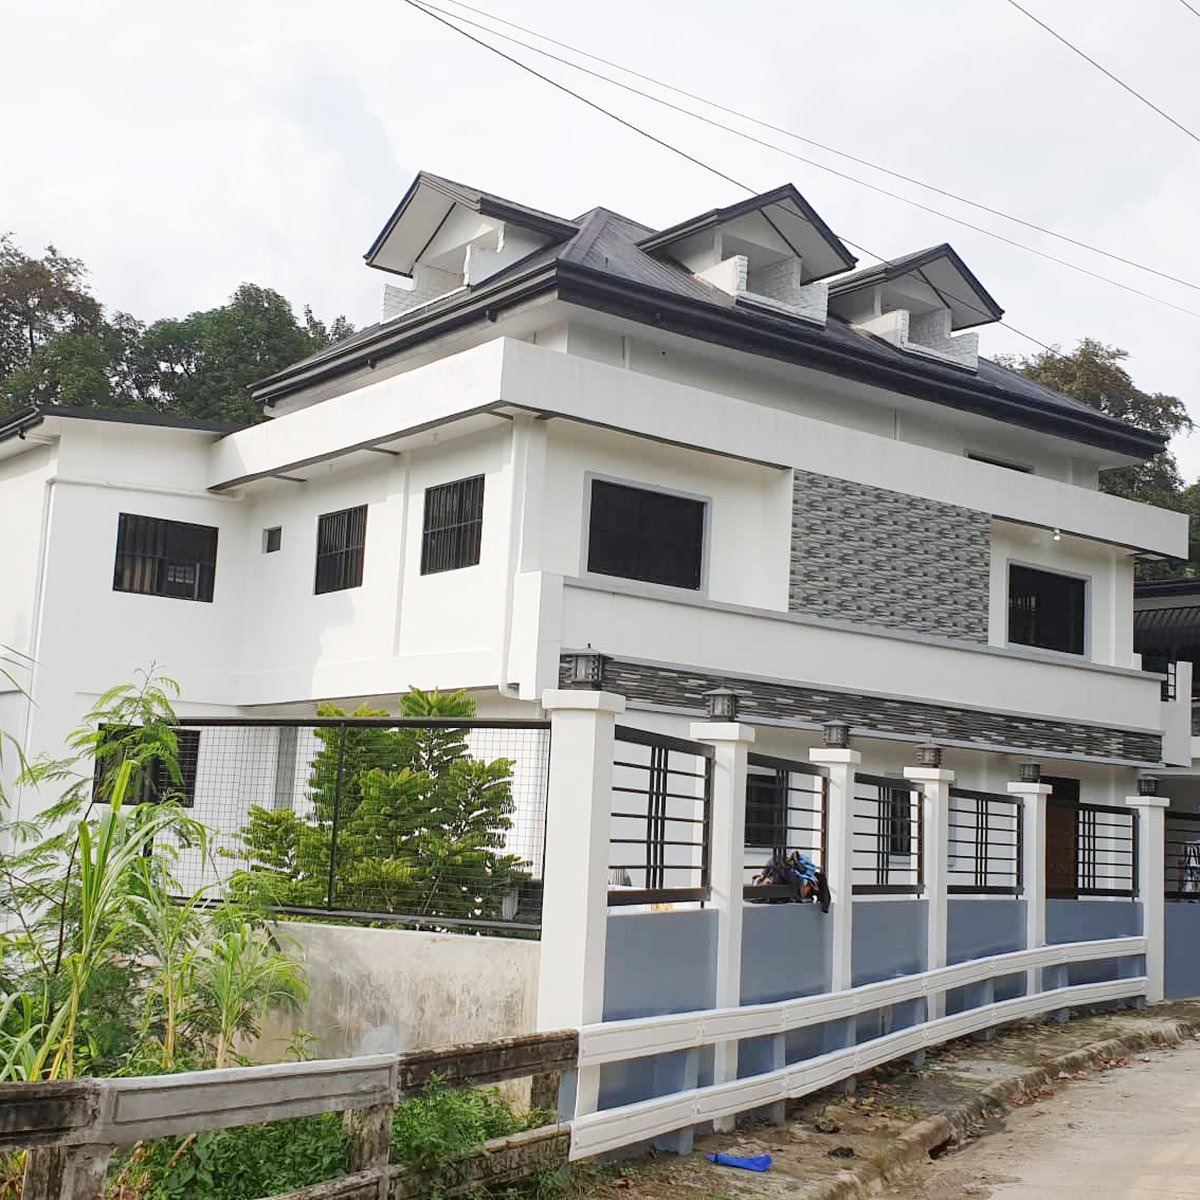 9 bedrooms House and Lot for sale in Antipolo